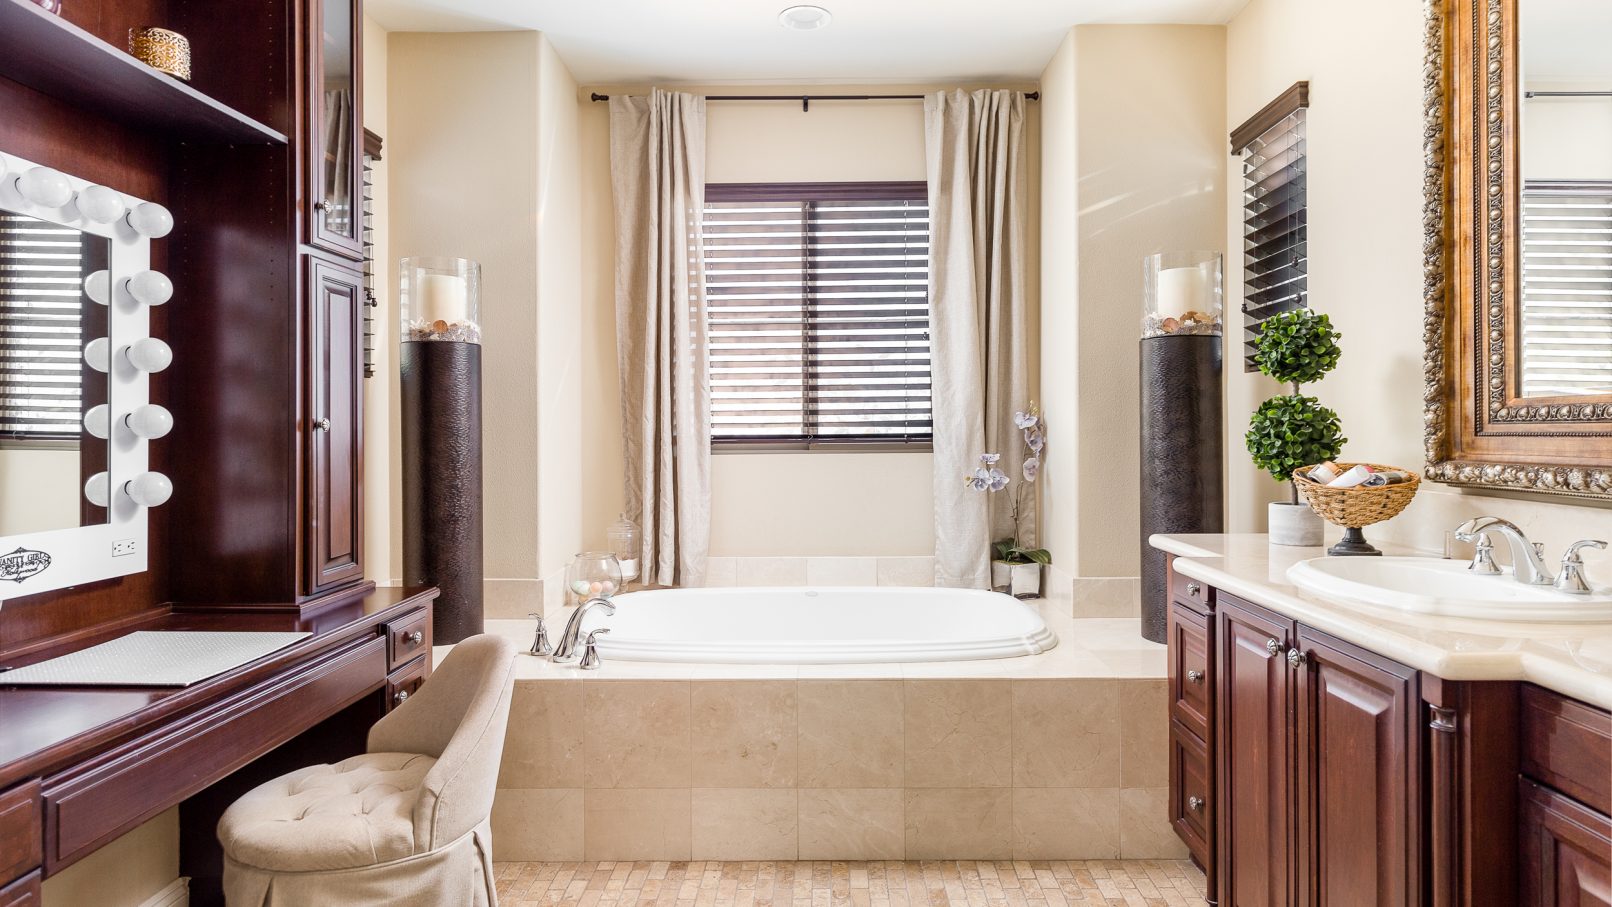 Orange County Interior Design Photography featuring a Ladera Ranch Master Bathroom nicely appointed with beige and cherry wood finishes